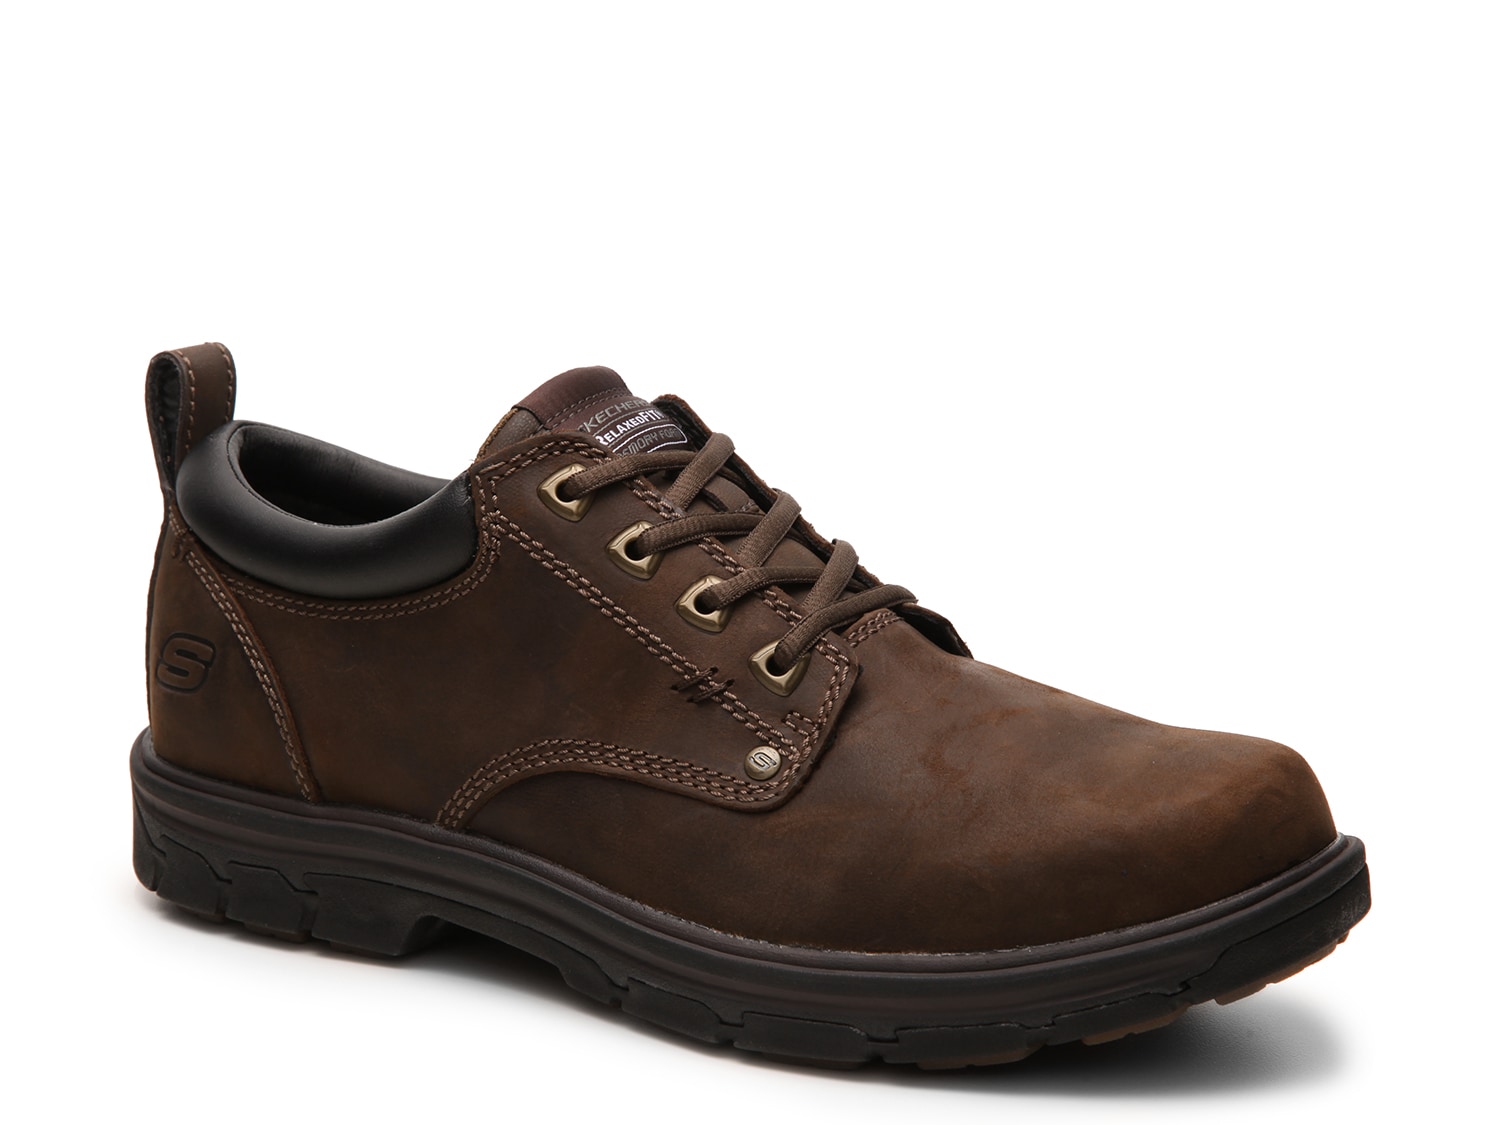 Skechers Relaxed Fit Rilar Oxford - Free Shipping | DSW